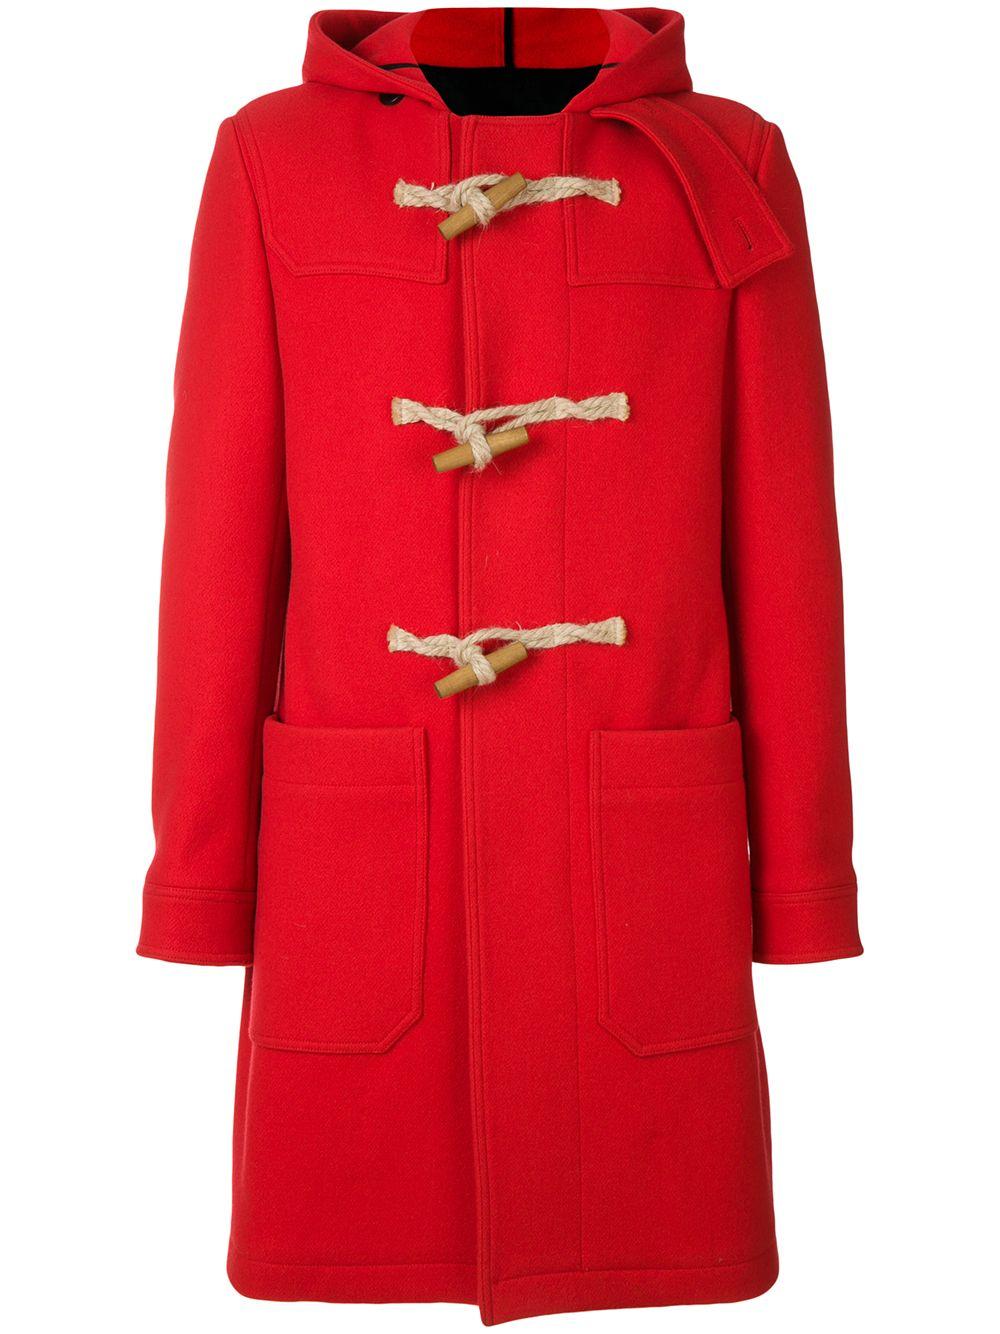 AMI Wool Duffle Coat in Red for Men - Lyst